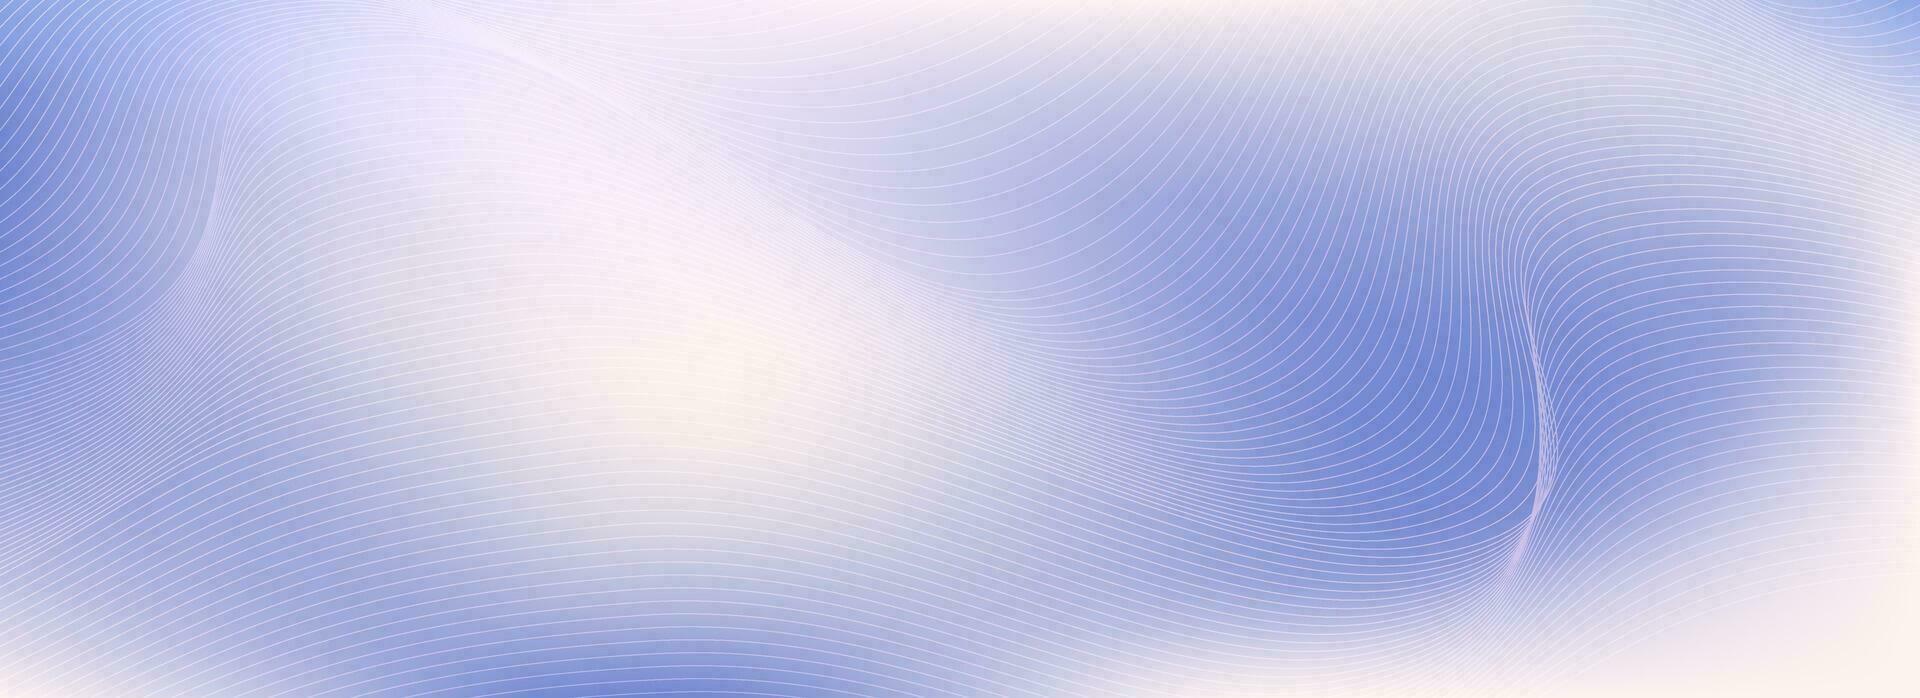 Pastel gradient background with blended lines. vector